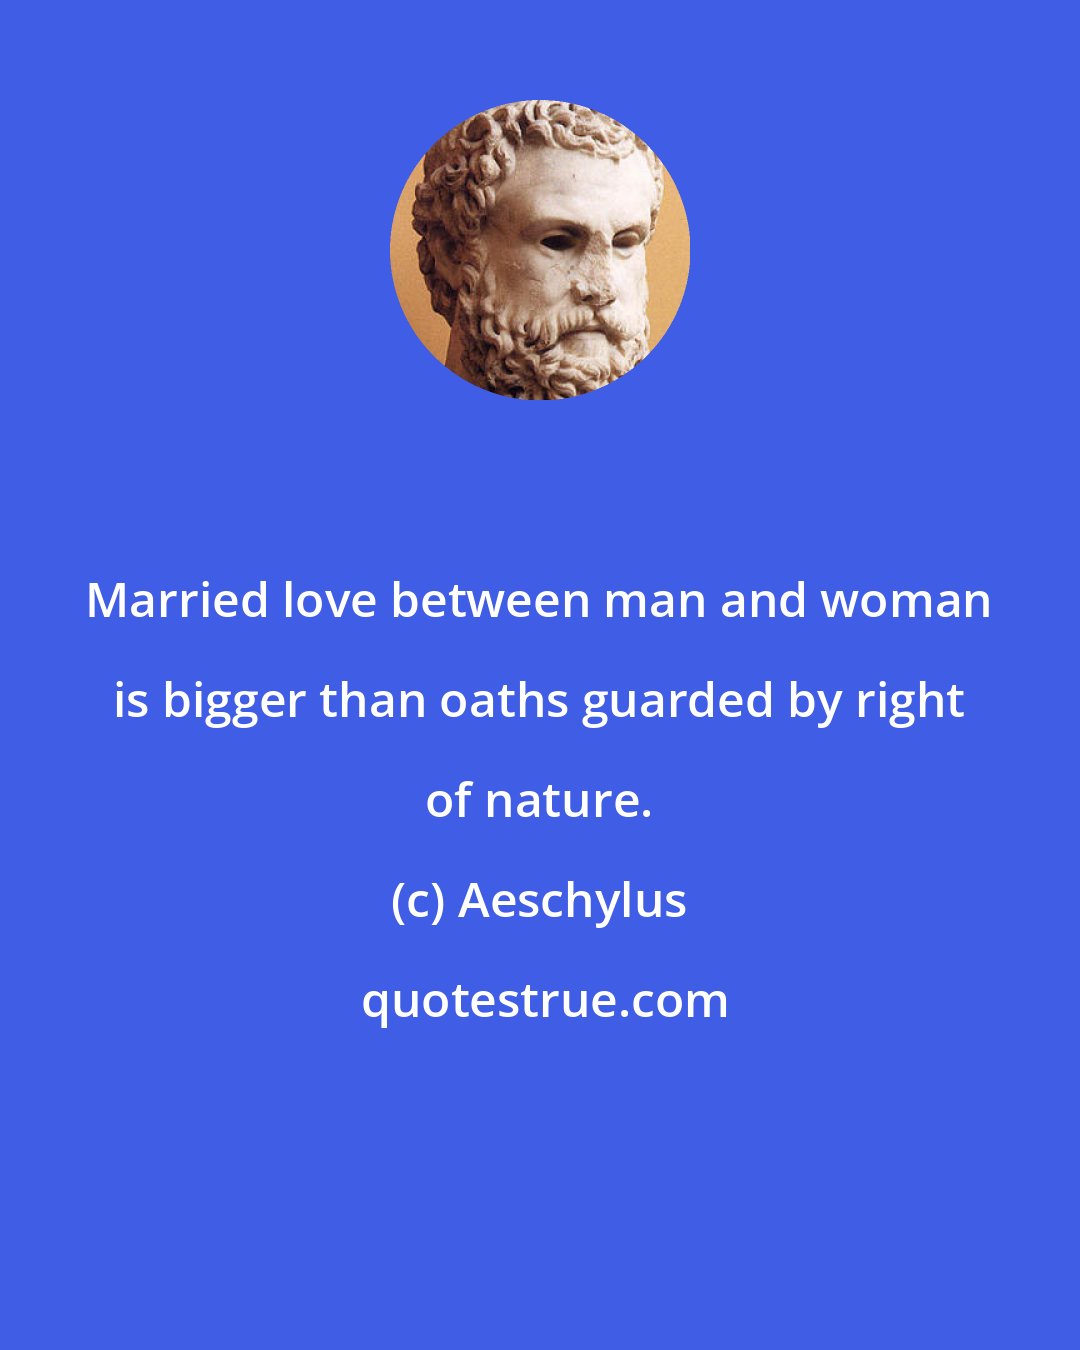 Aeschylus: Married love between man and woman is bigger than oaths guarded by right of nature.